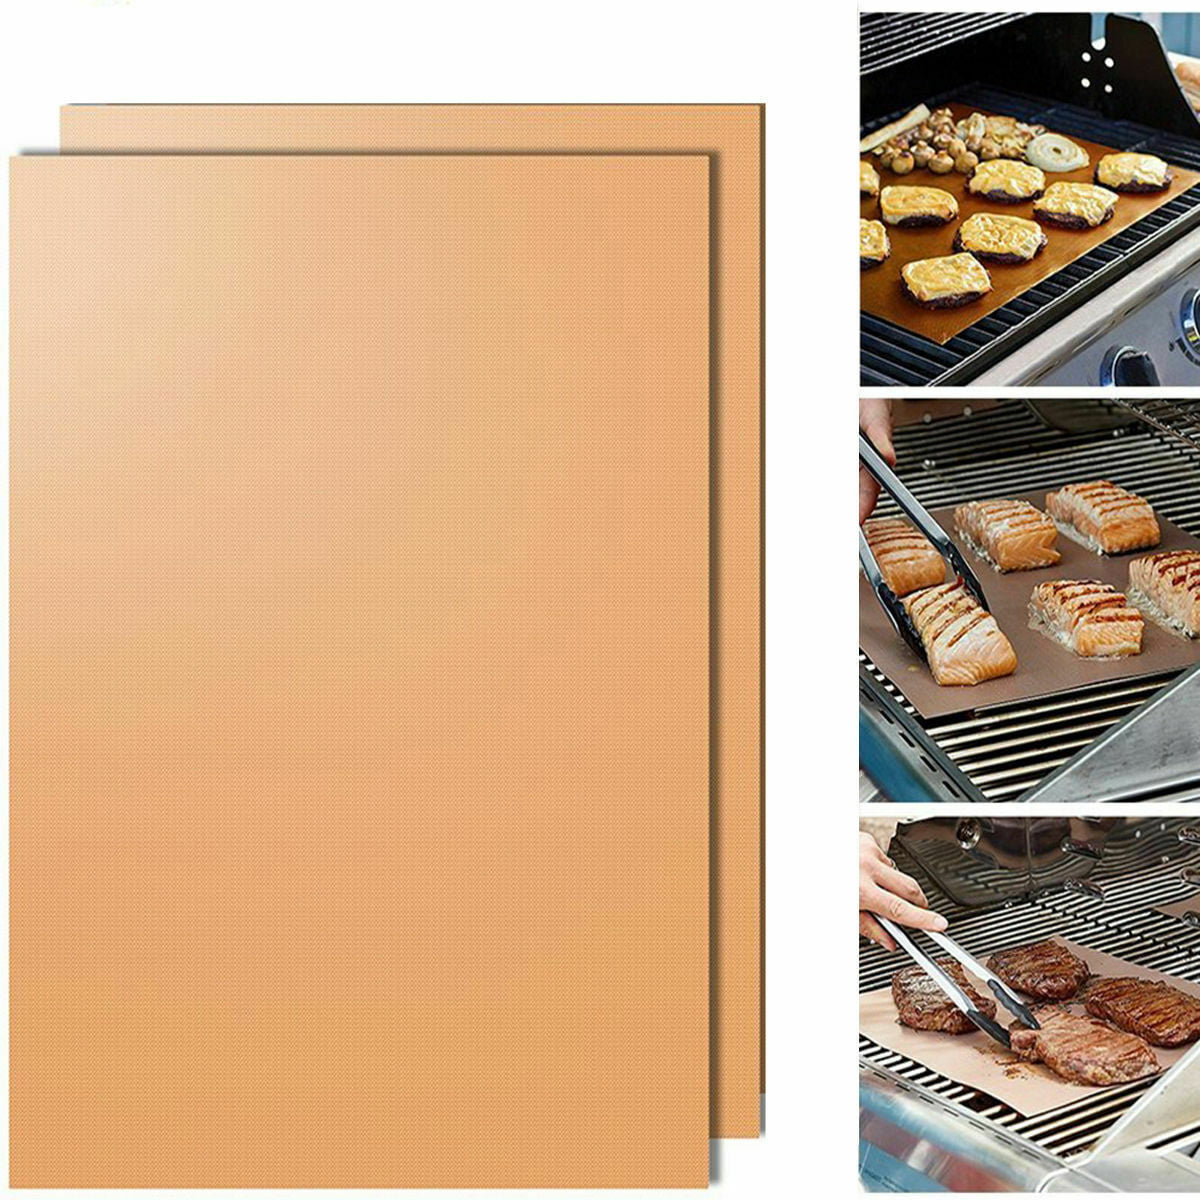 BBQ Grill Mat Non-stick Oven Liners Cooking Baking Reusable Cook Sheet Pad 58*41 